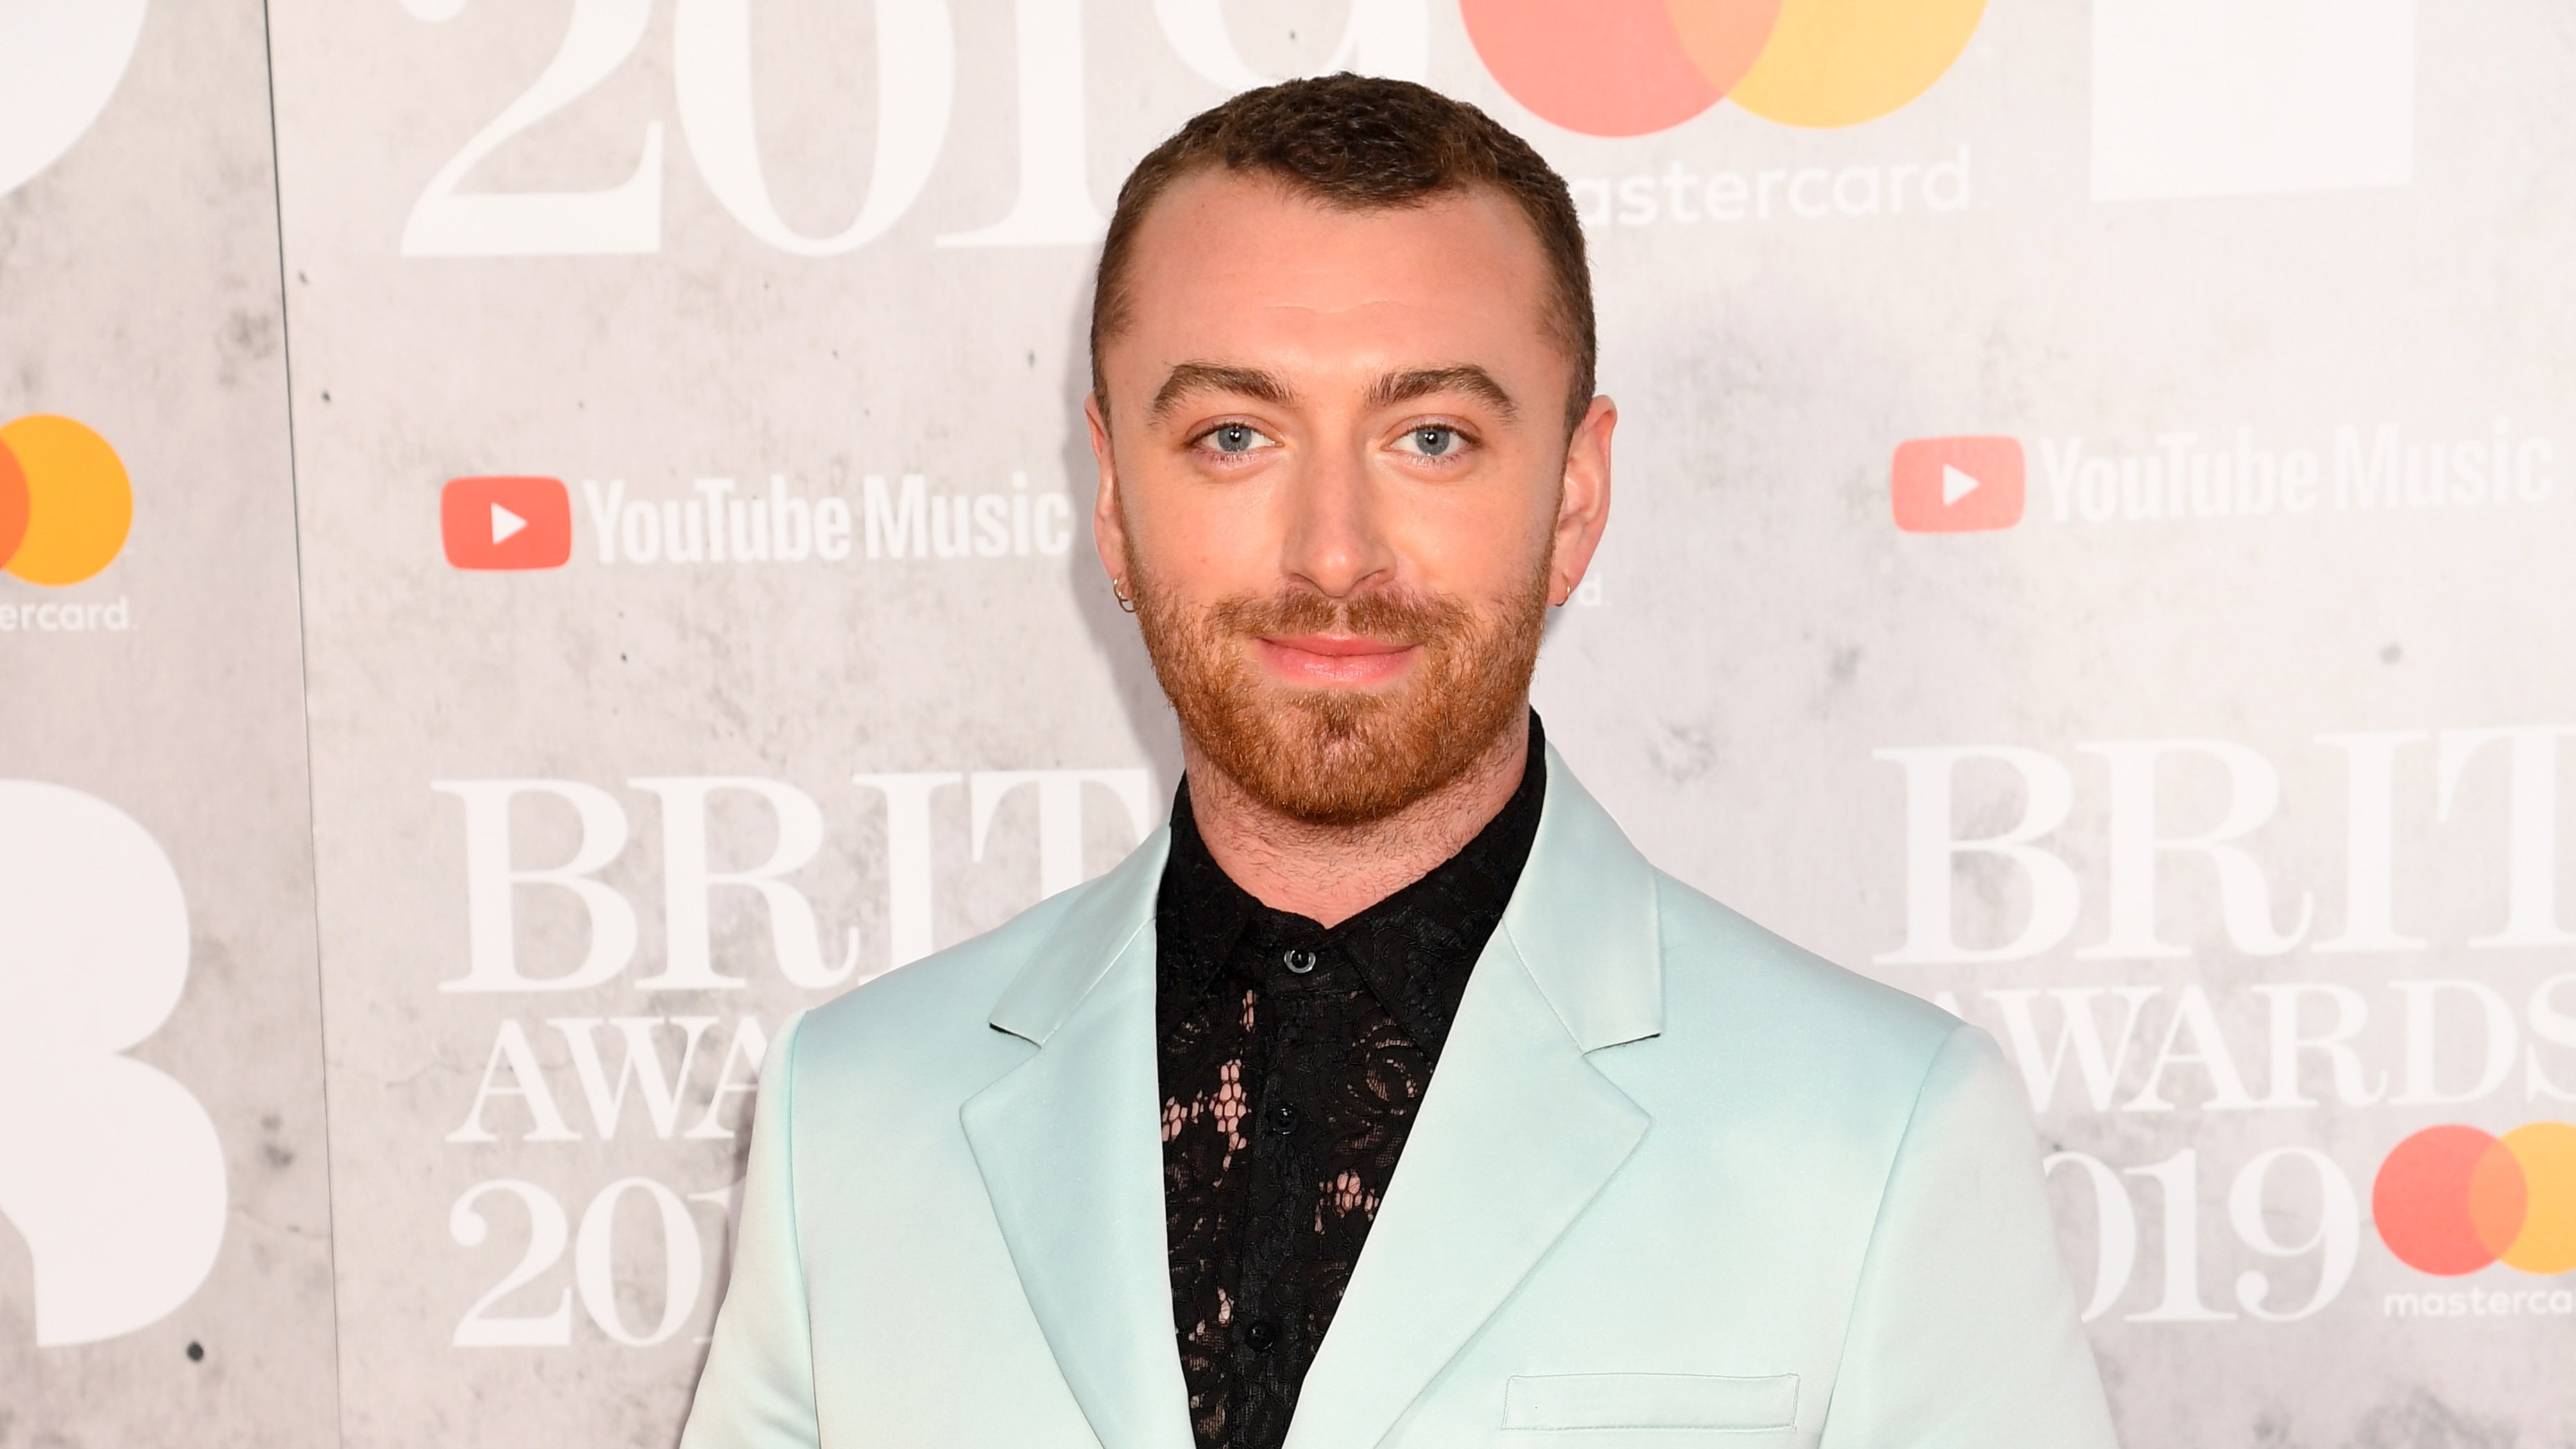 Sam Smith called for BRIT Awards to go gender-neutral, now says it's a 'shame' no women nominated this year